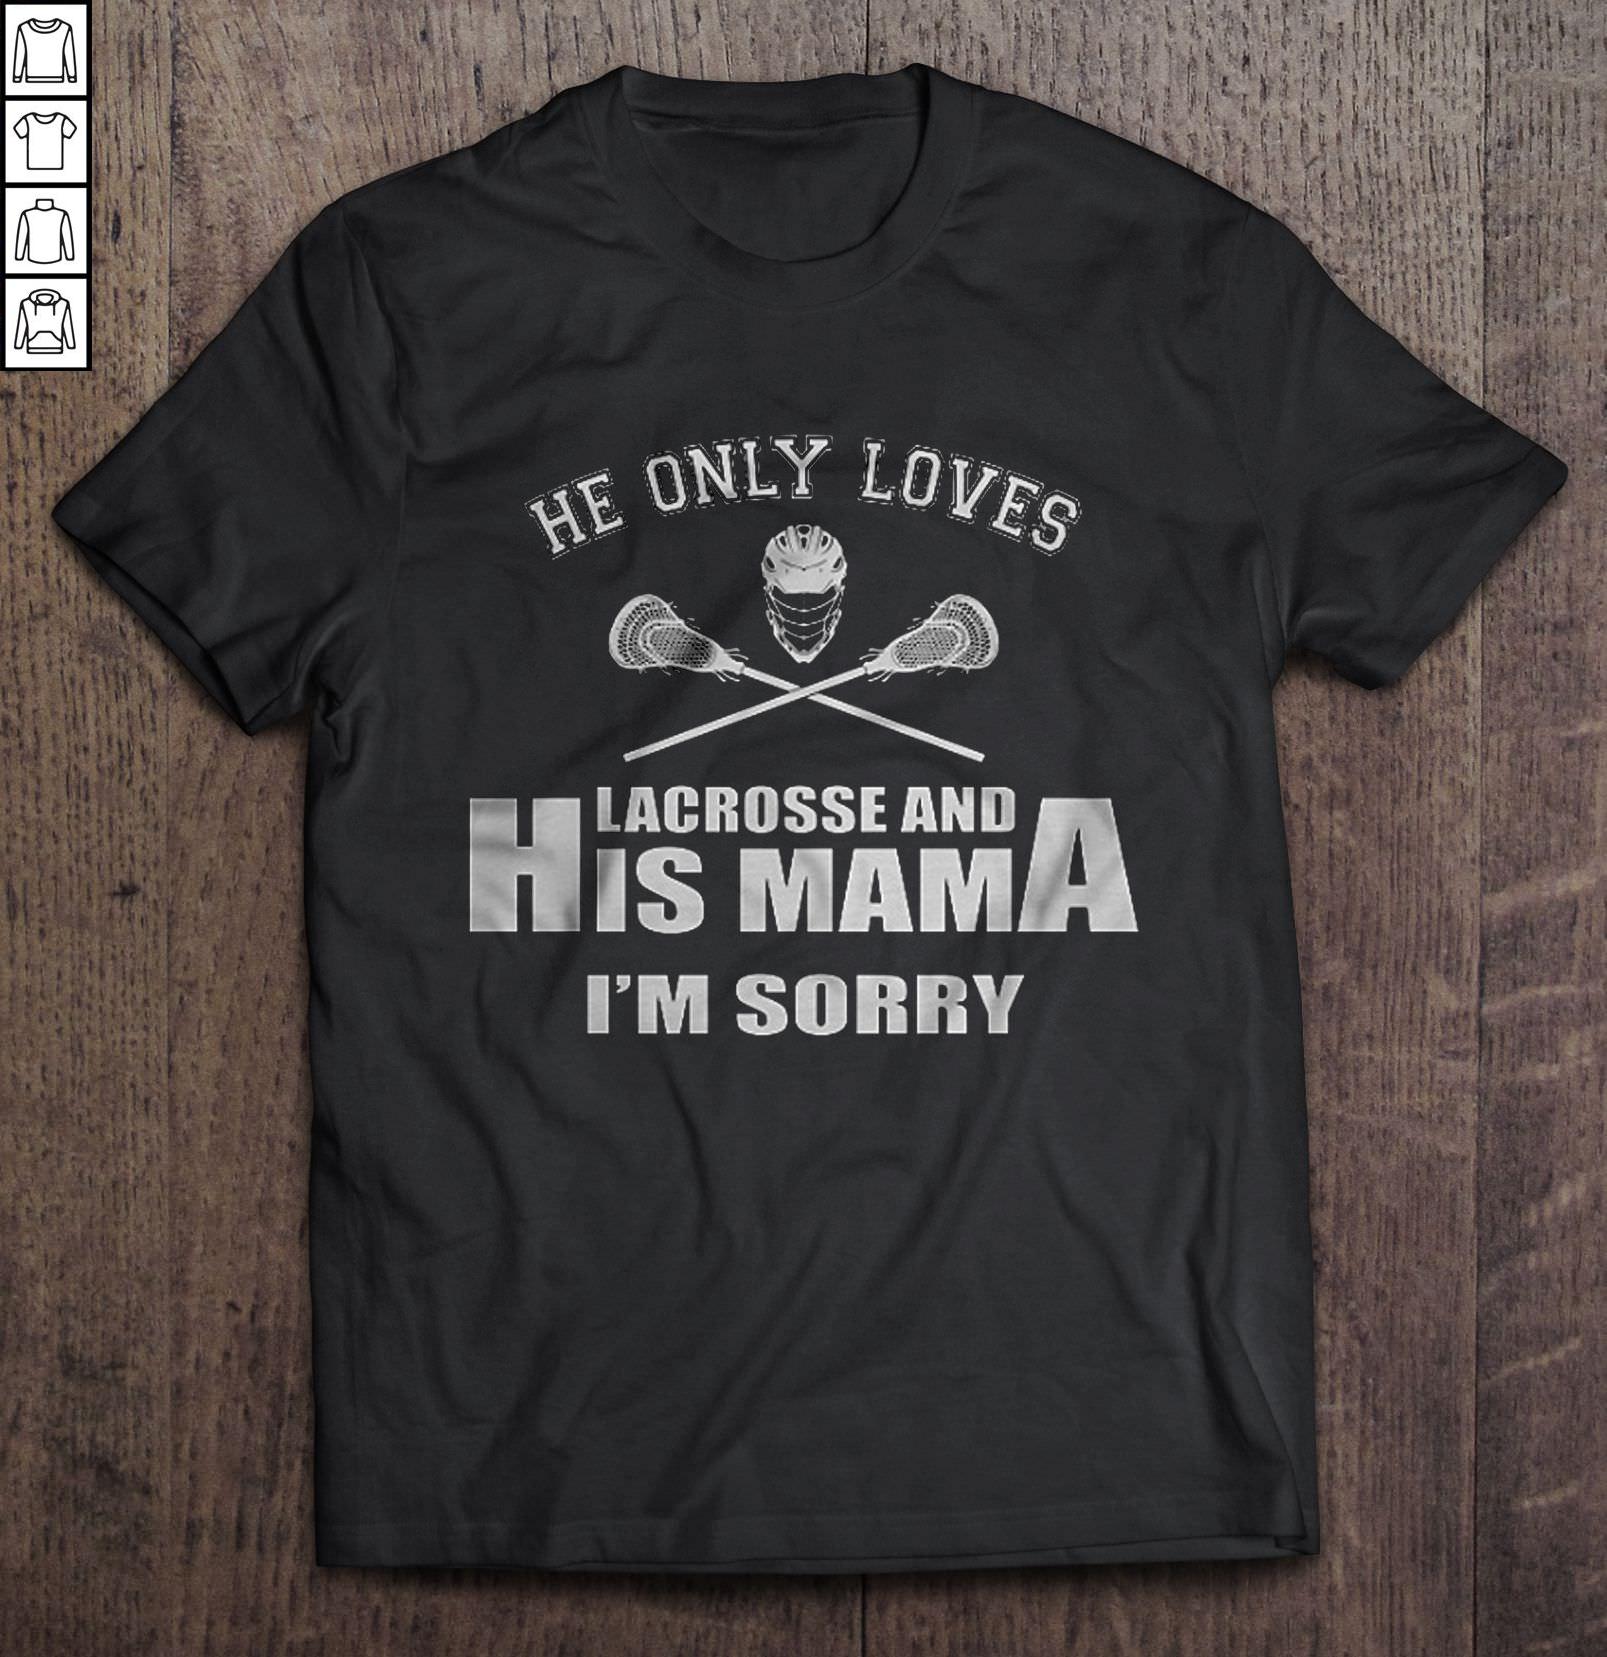 He Only Loves Lacrosse And His Mama I’m Sorry Shirt